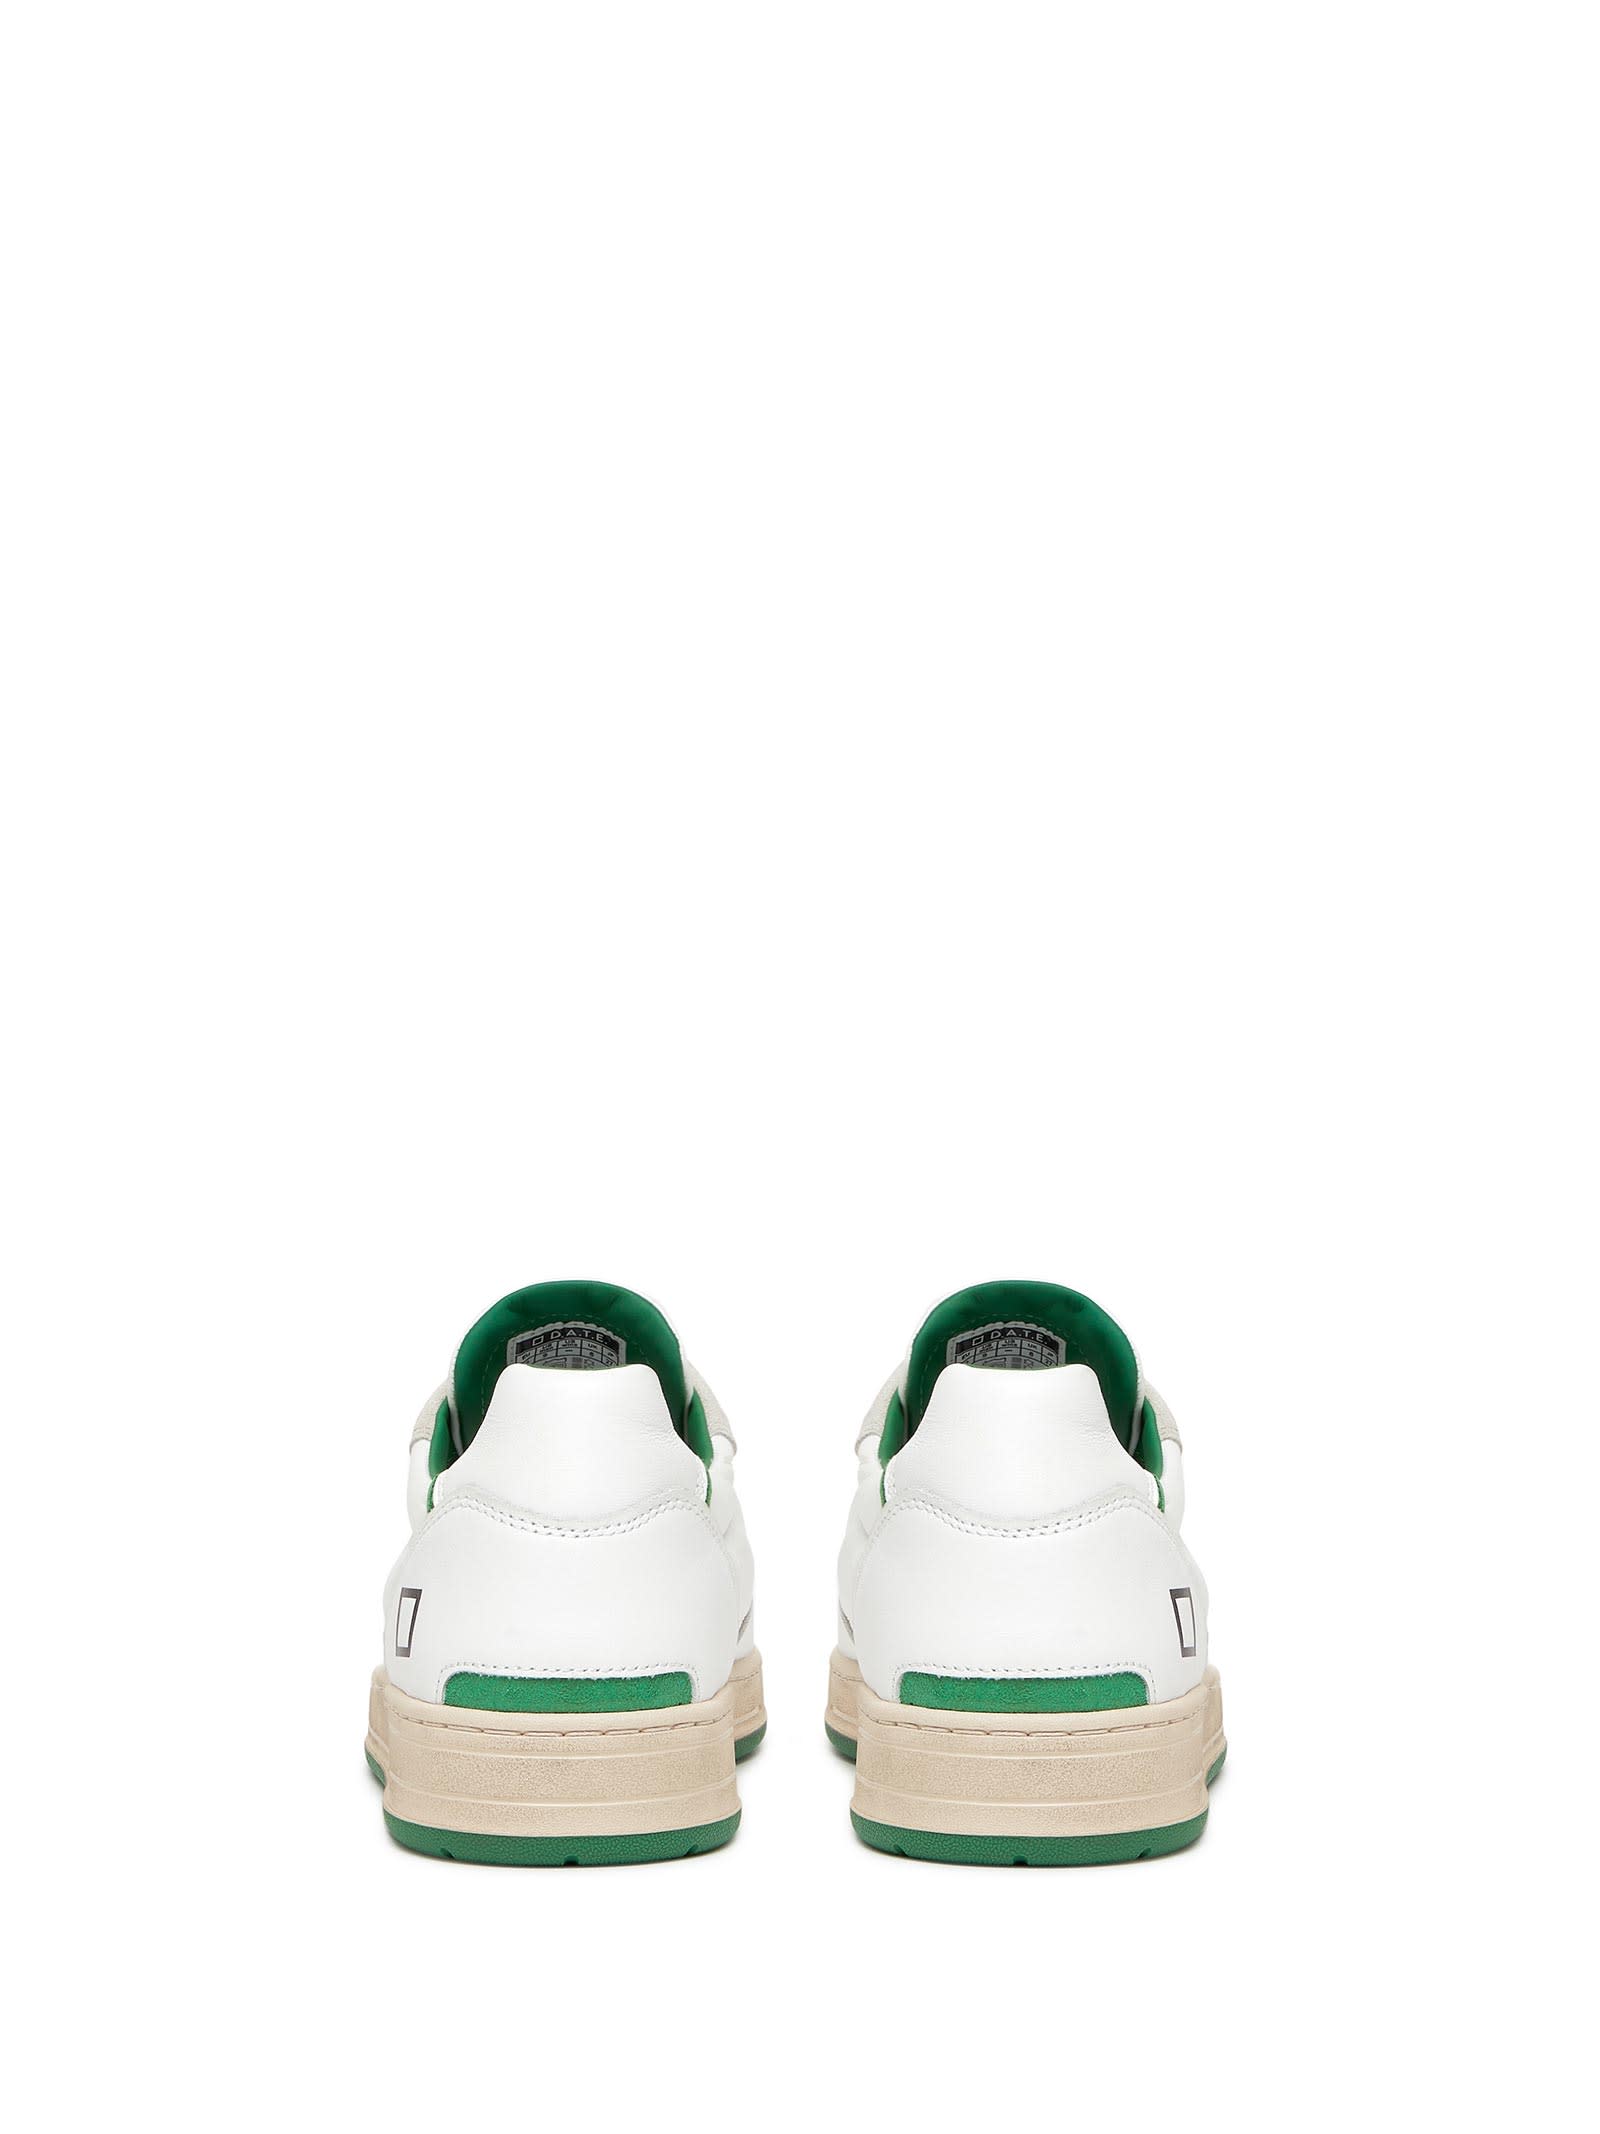 Shop Date Court 2.0 White Green Leather Sneaker